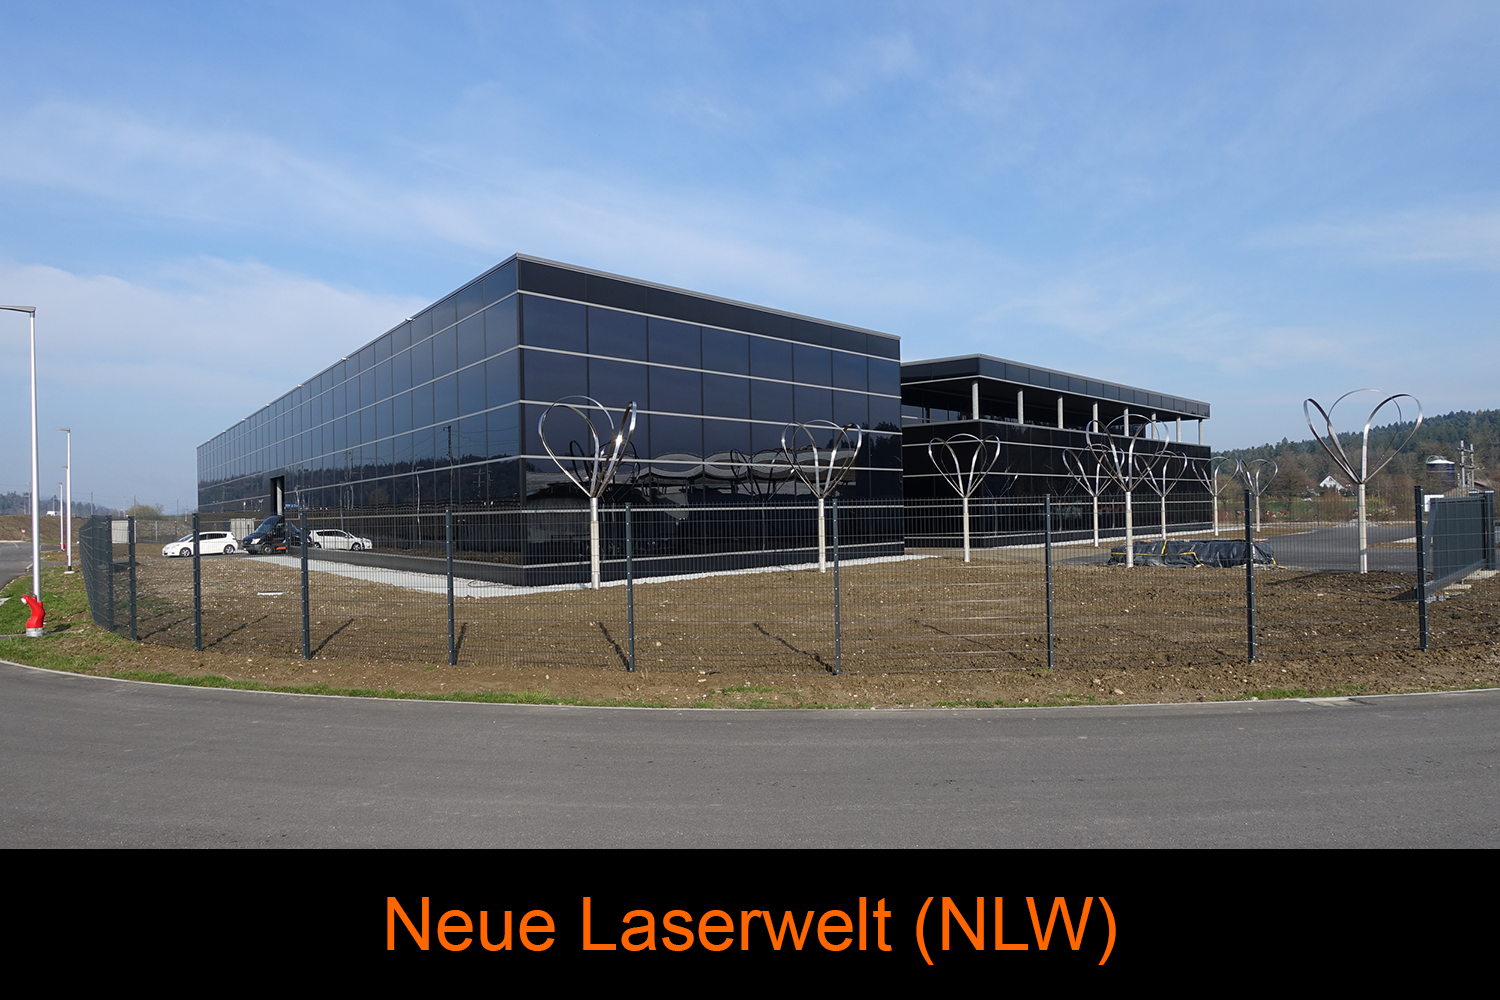 Our new laser world (NLW) is ready